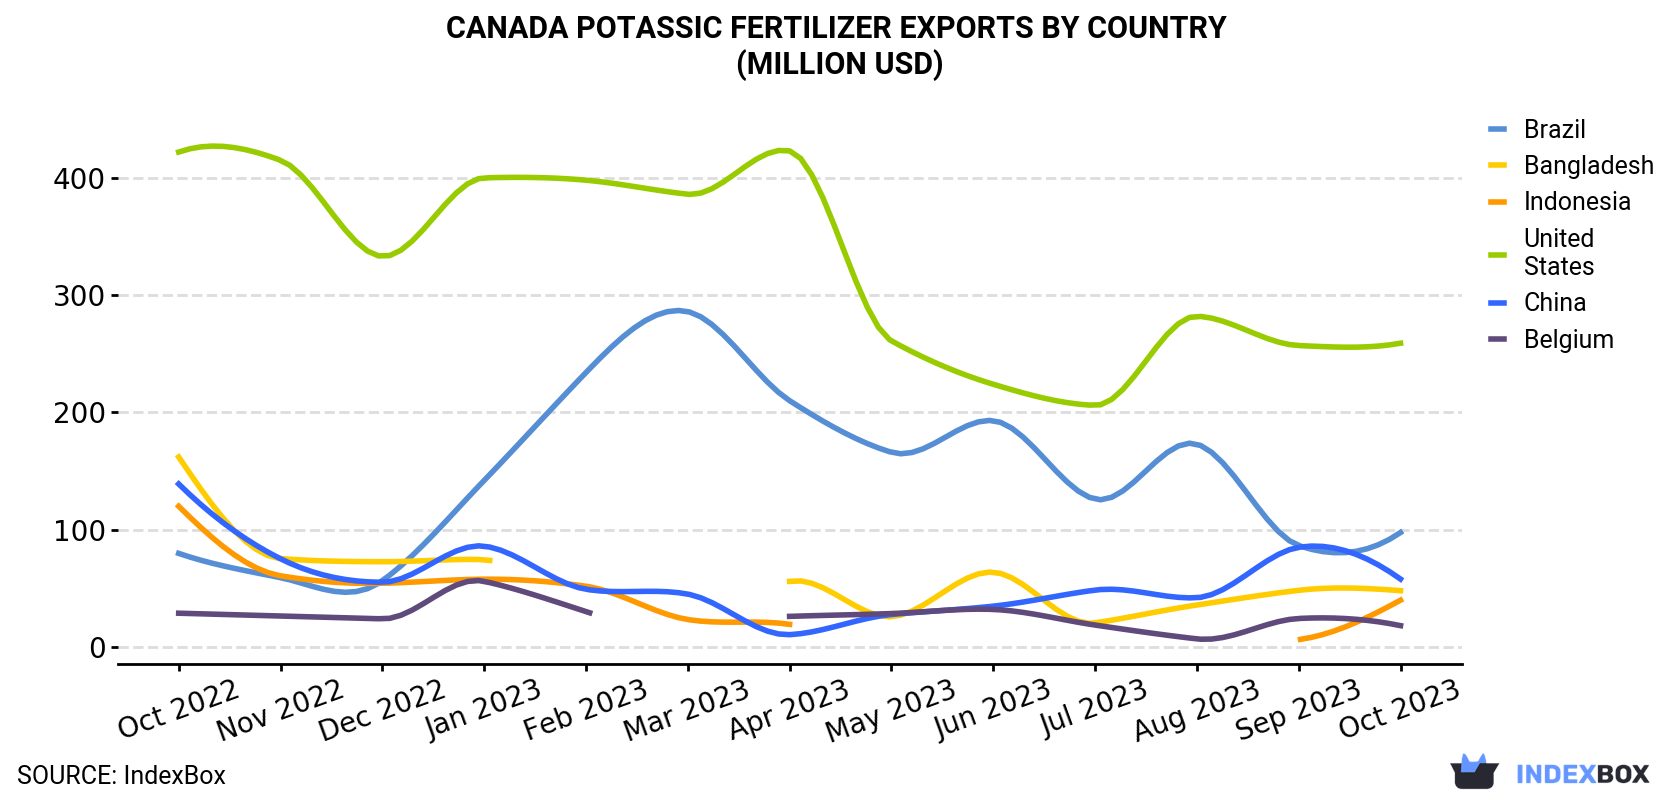 Canada Potassic Fertilizer Exports By Country (Million USD)